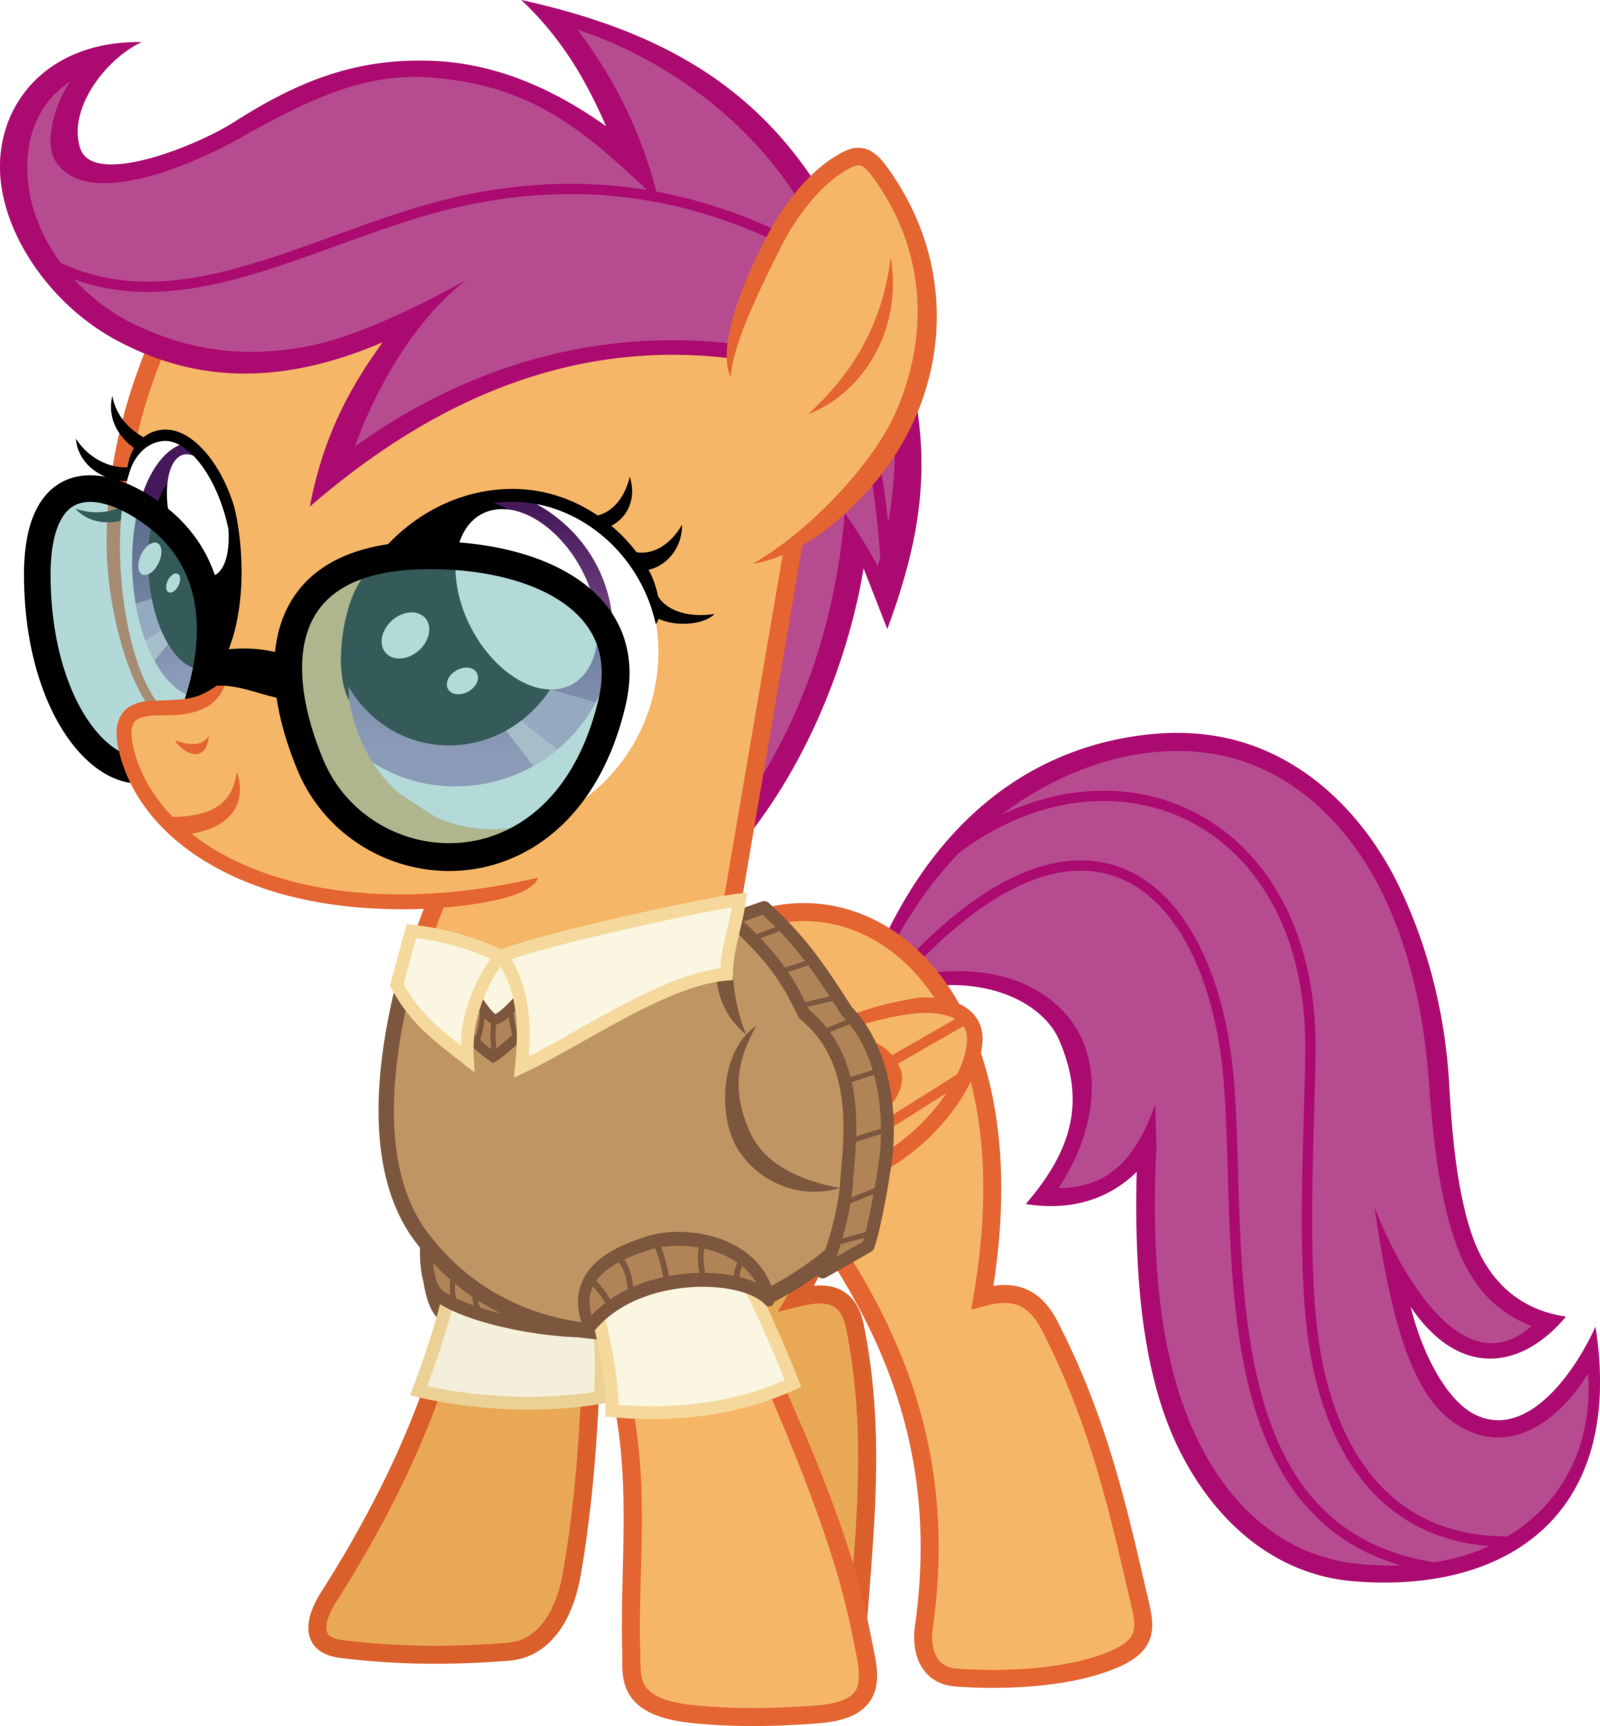 Nerdy Scootaloo By Magister39 Nerdy Scootaloo By Magister39 - My Little Pony: Friendship Is Magic (1600x1726)